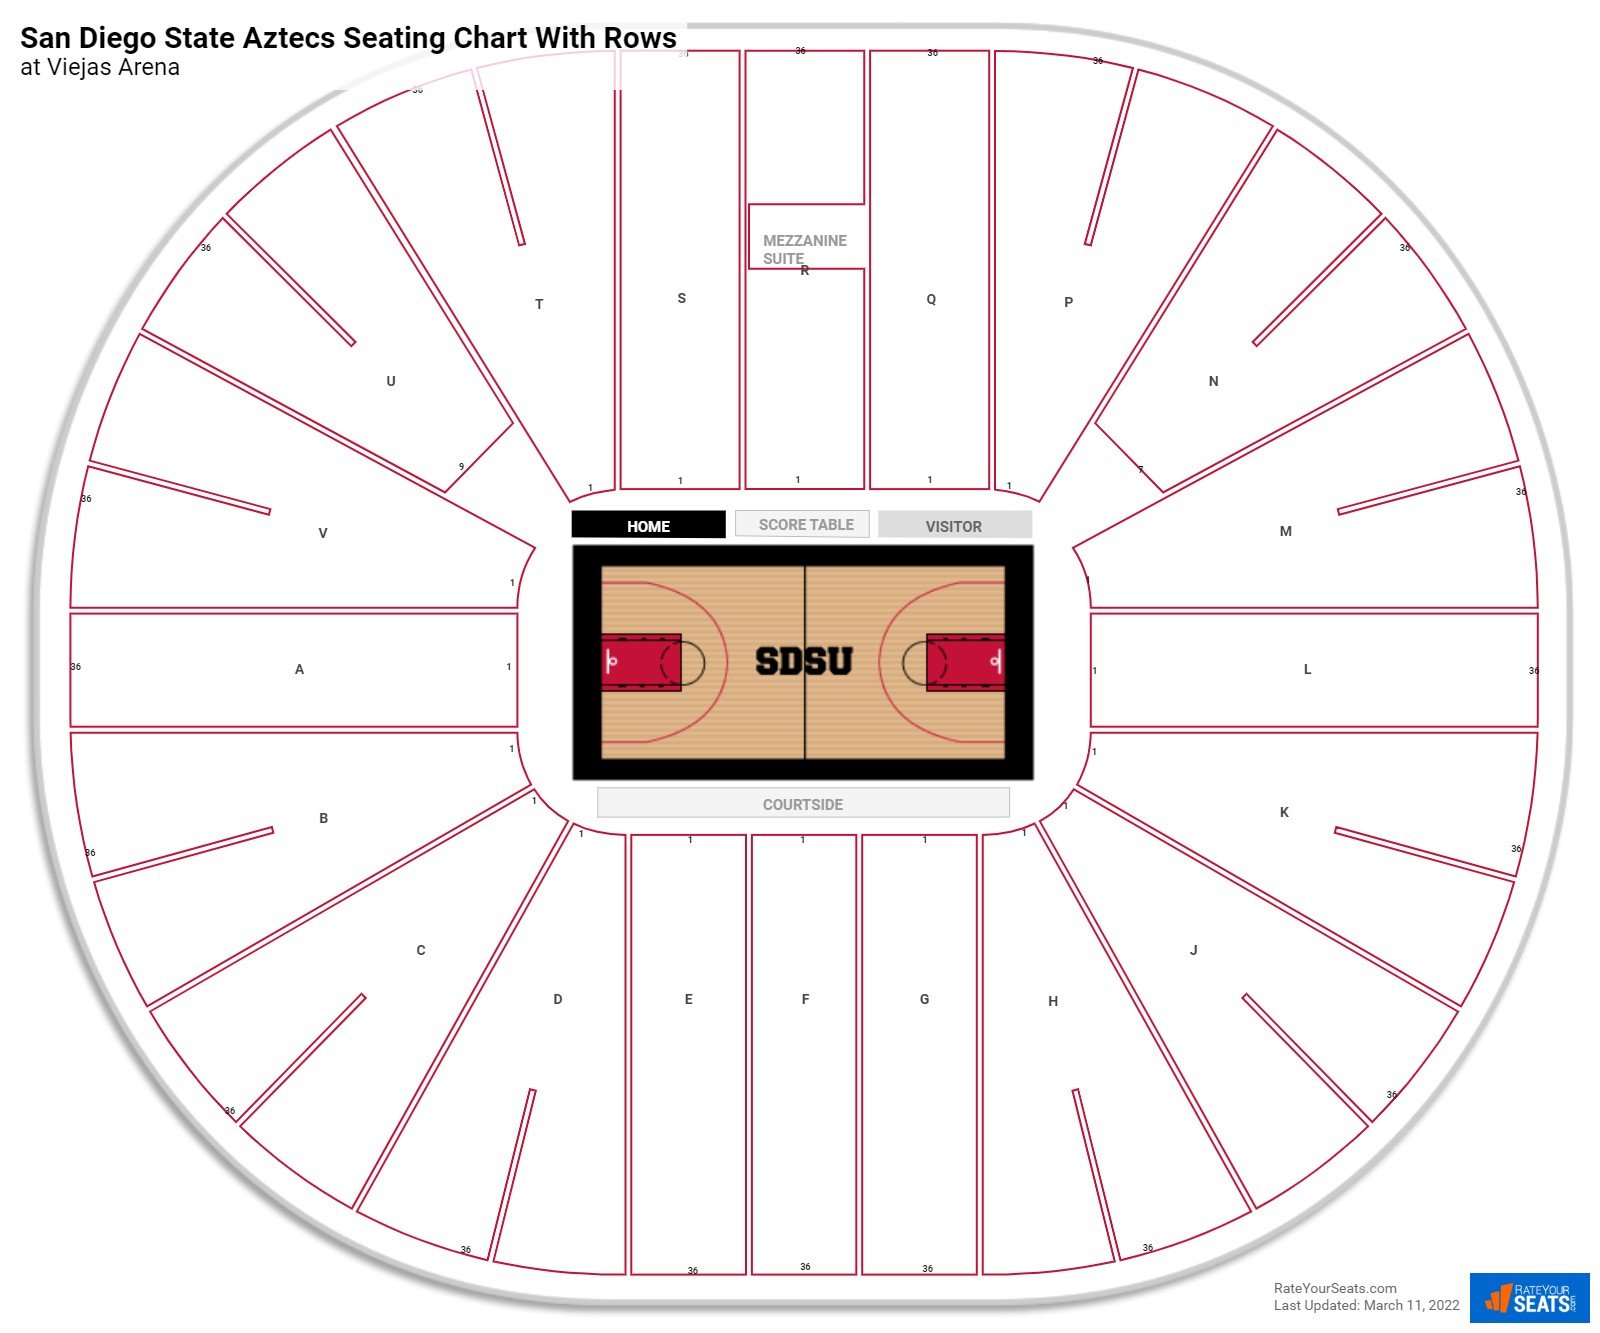 Viejas Arena seating chart with row numbers